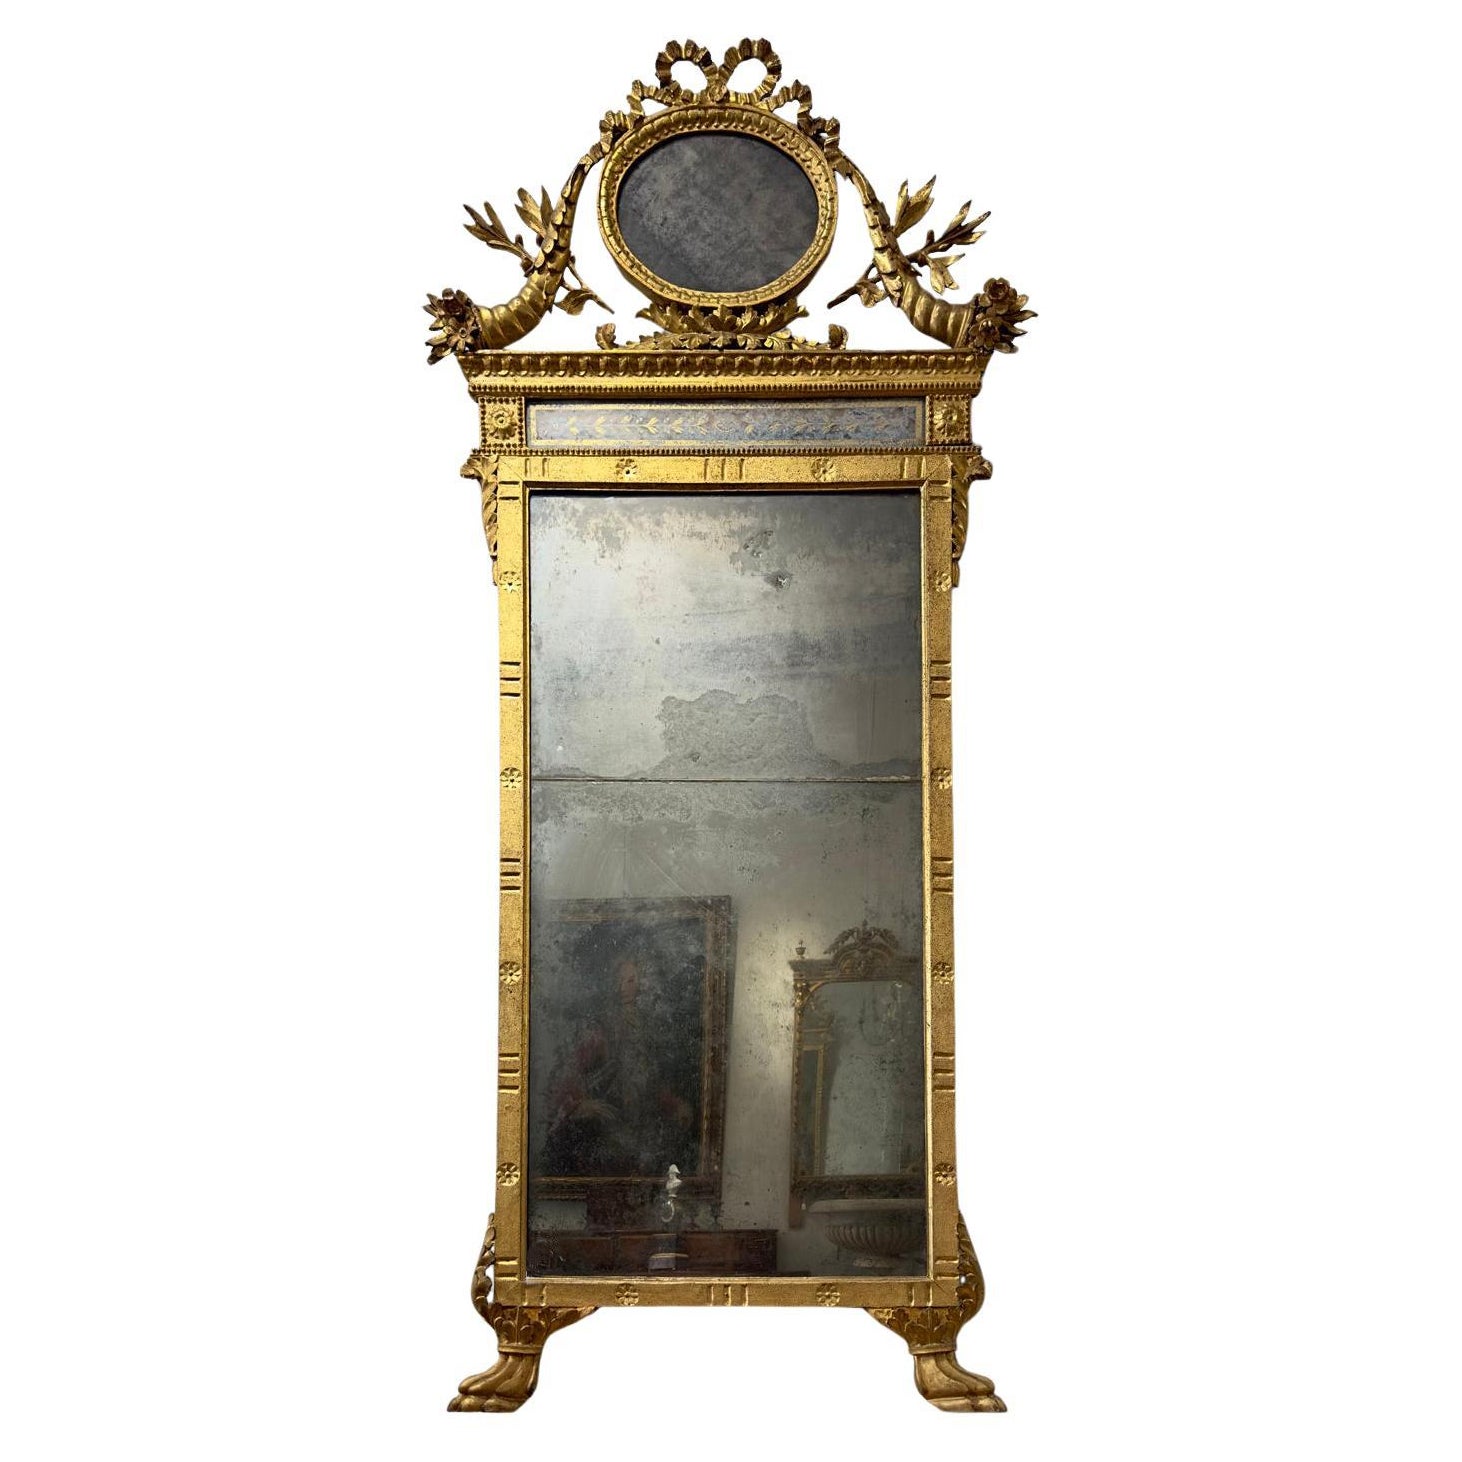 END OF THE 18th CENTURY NEOCLASSICAL MIRROR WITH CORNUCOPIAS AND OLIVE BRANCHES  For Sale